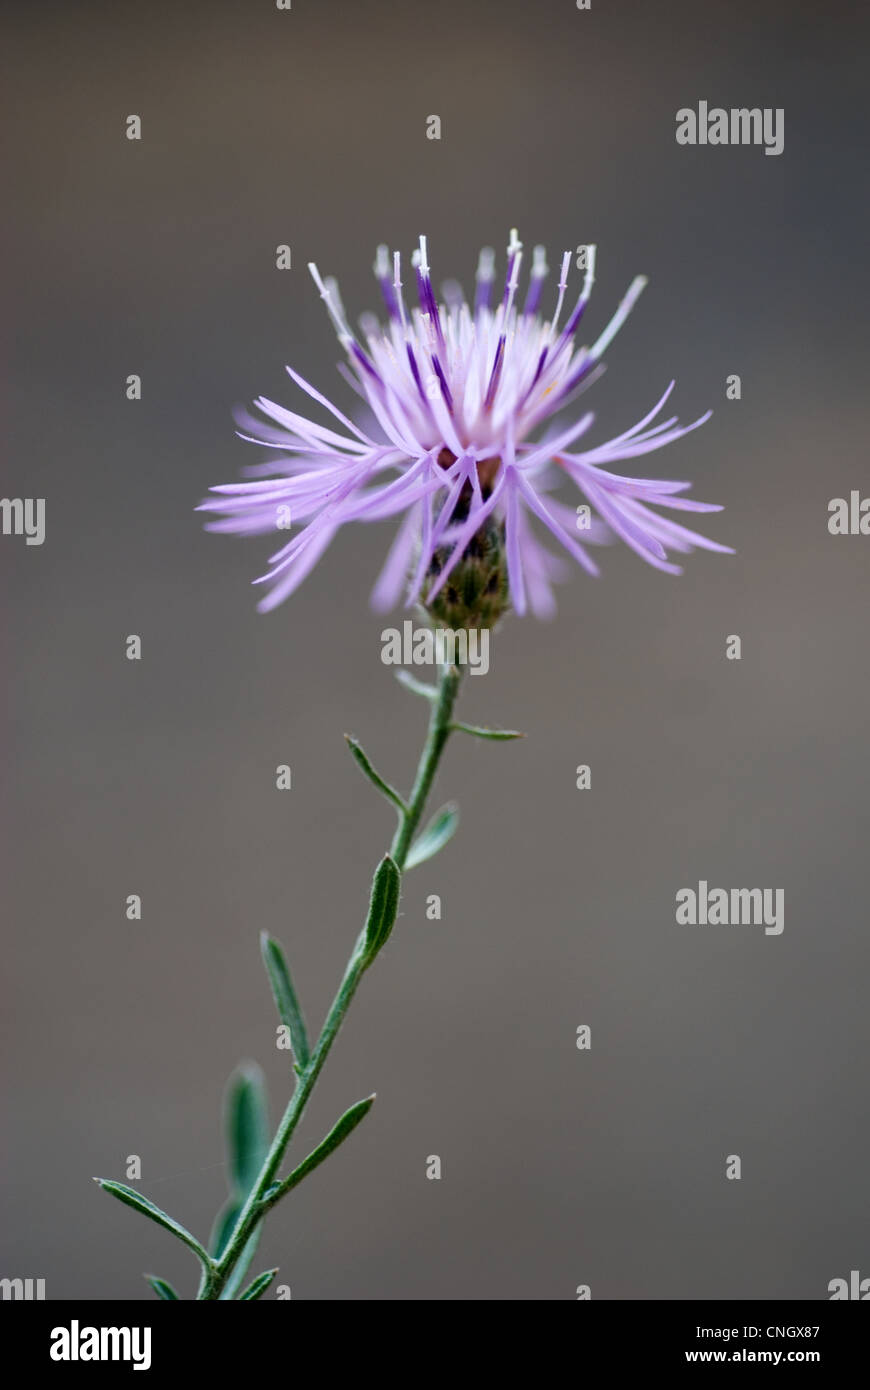 Close-up shot with shallow depth of field of the bloom of the invasive, noxious weed, Spotted Knapweed. Stock Photo